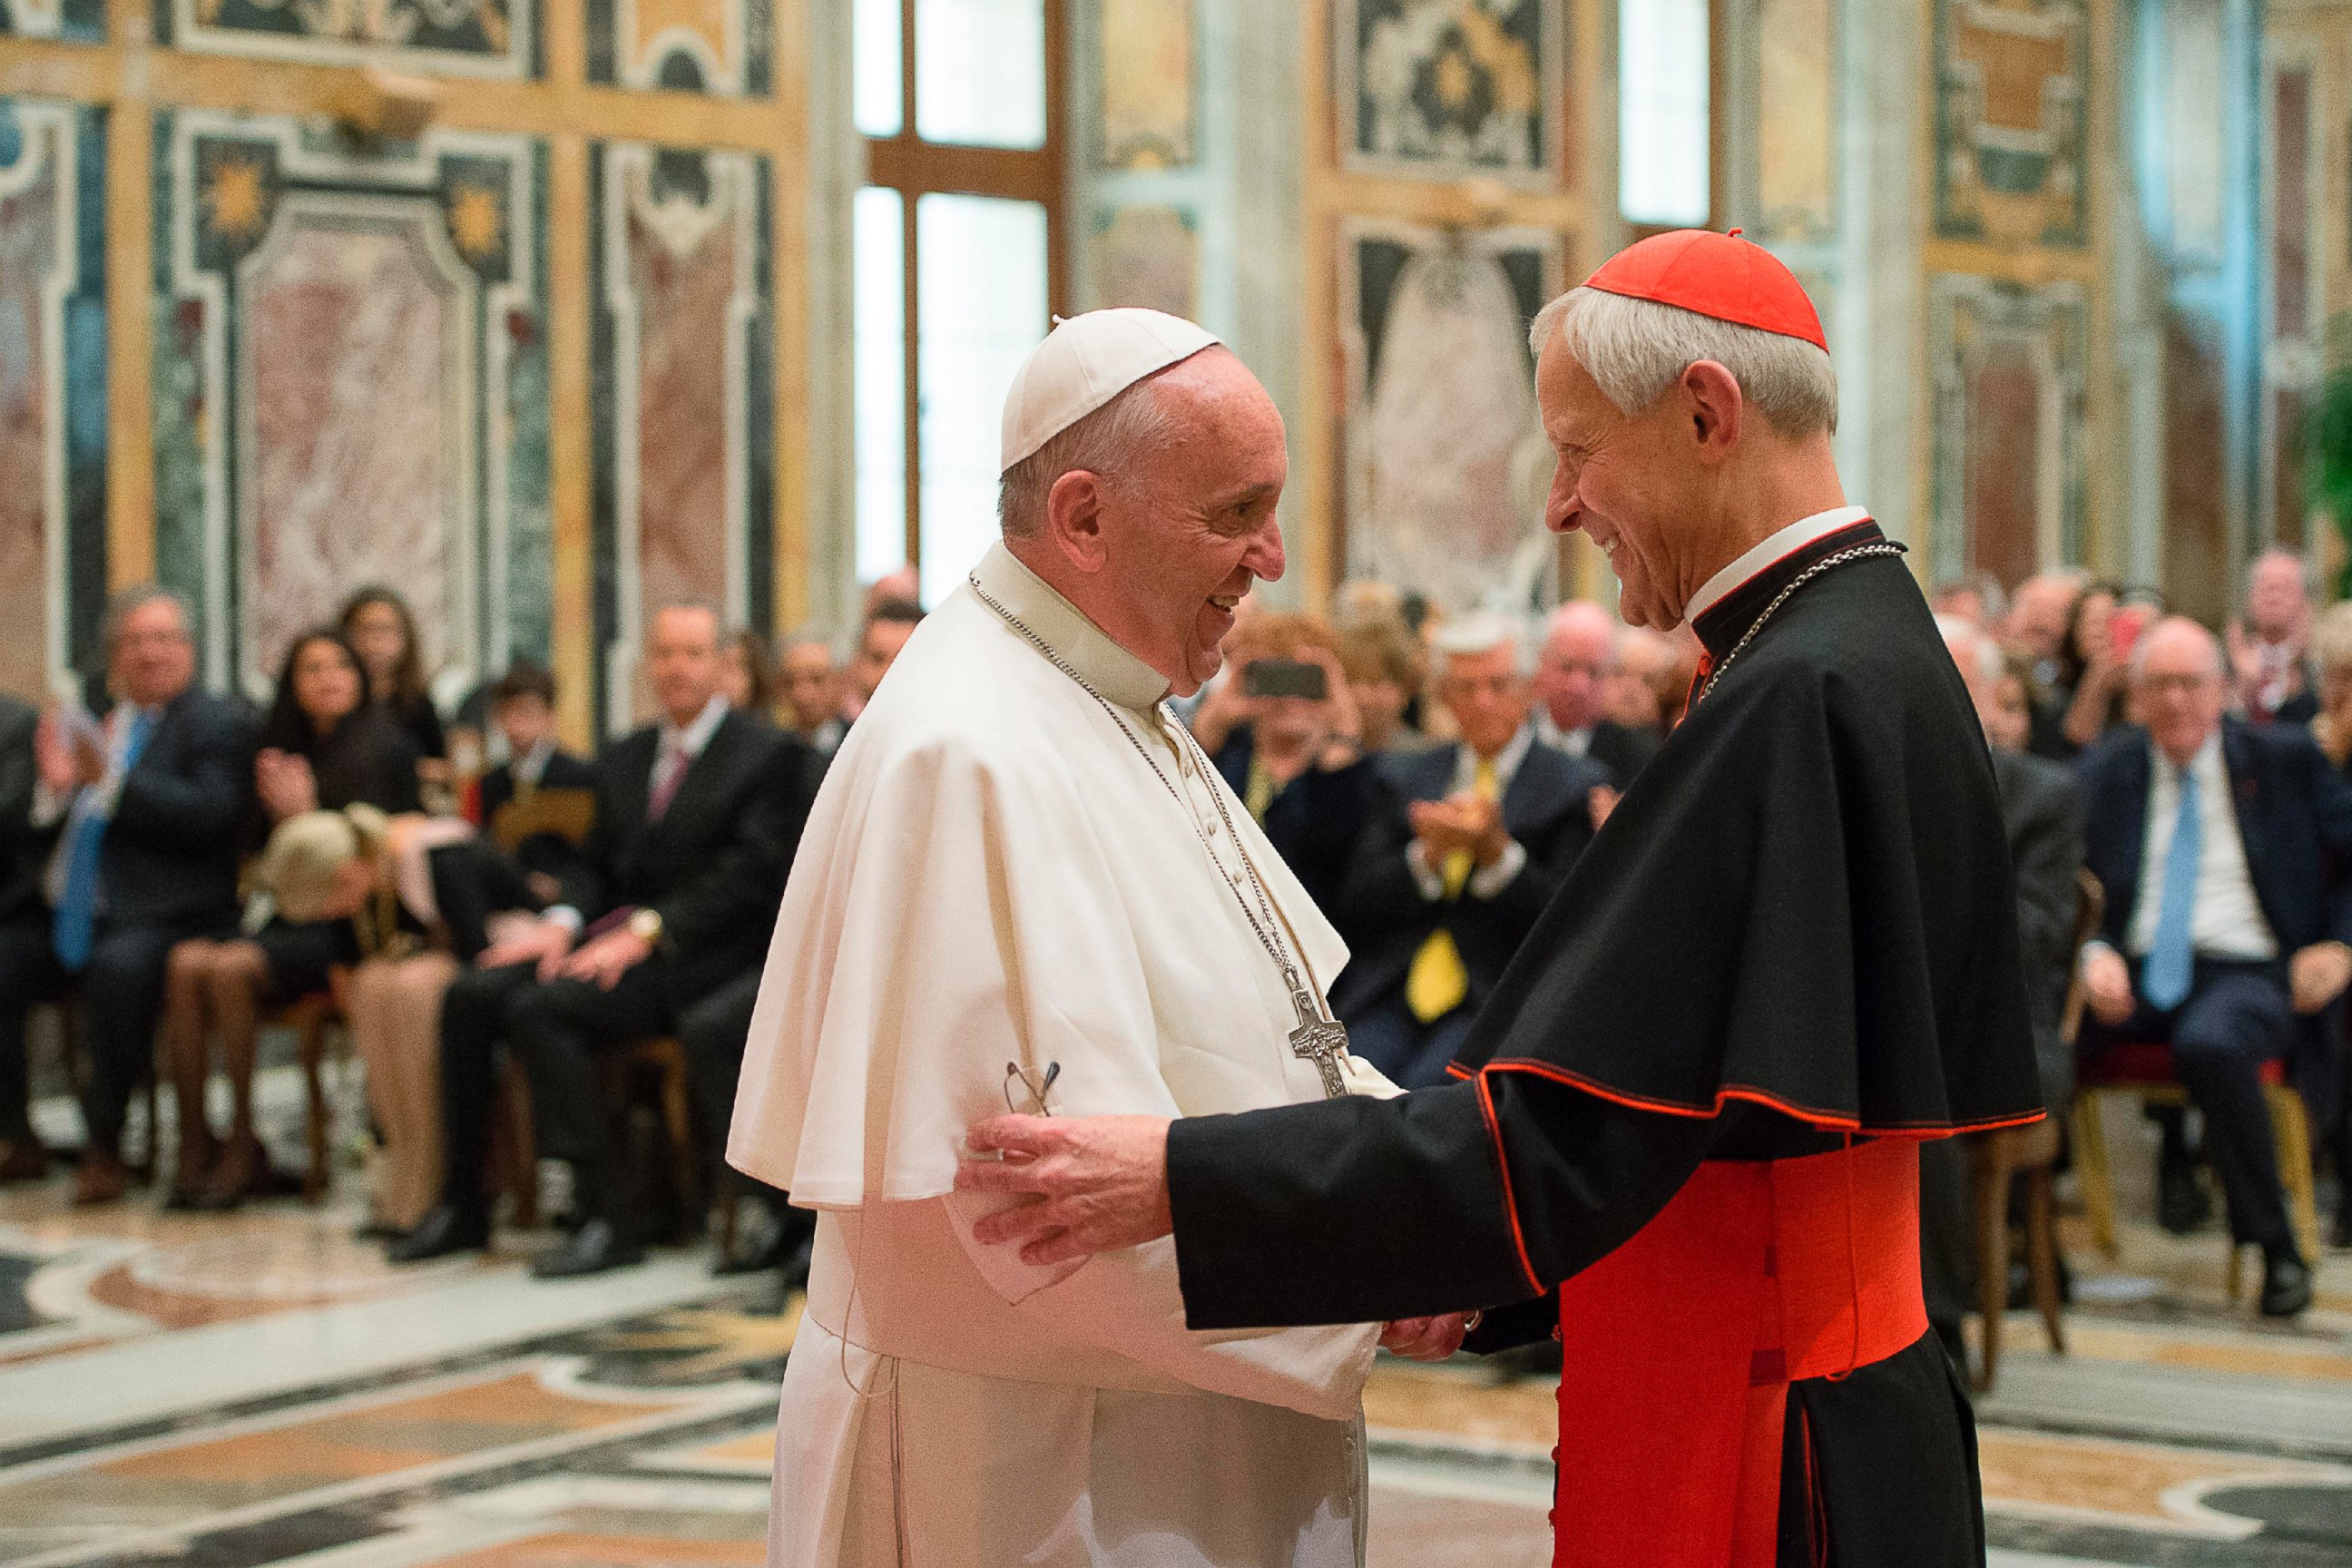 In this Wednesday, Oct. 20, 2010 file photo, Pope Francis, left, talks with Papal Foundation Chairman Cardinal Donald Wuerl, Archbishop of Washinghton, D.C., during a meeting with members of the Papal Foundation at the Vatican.